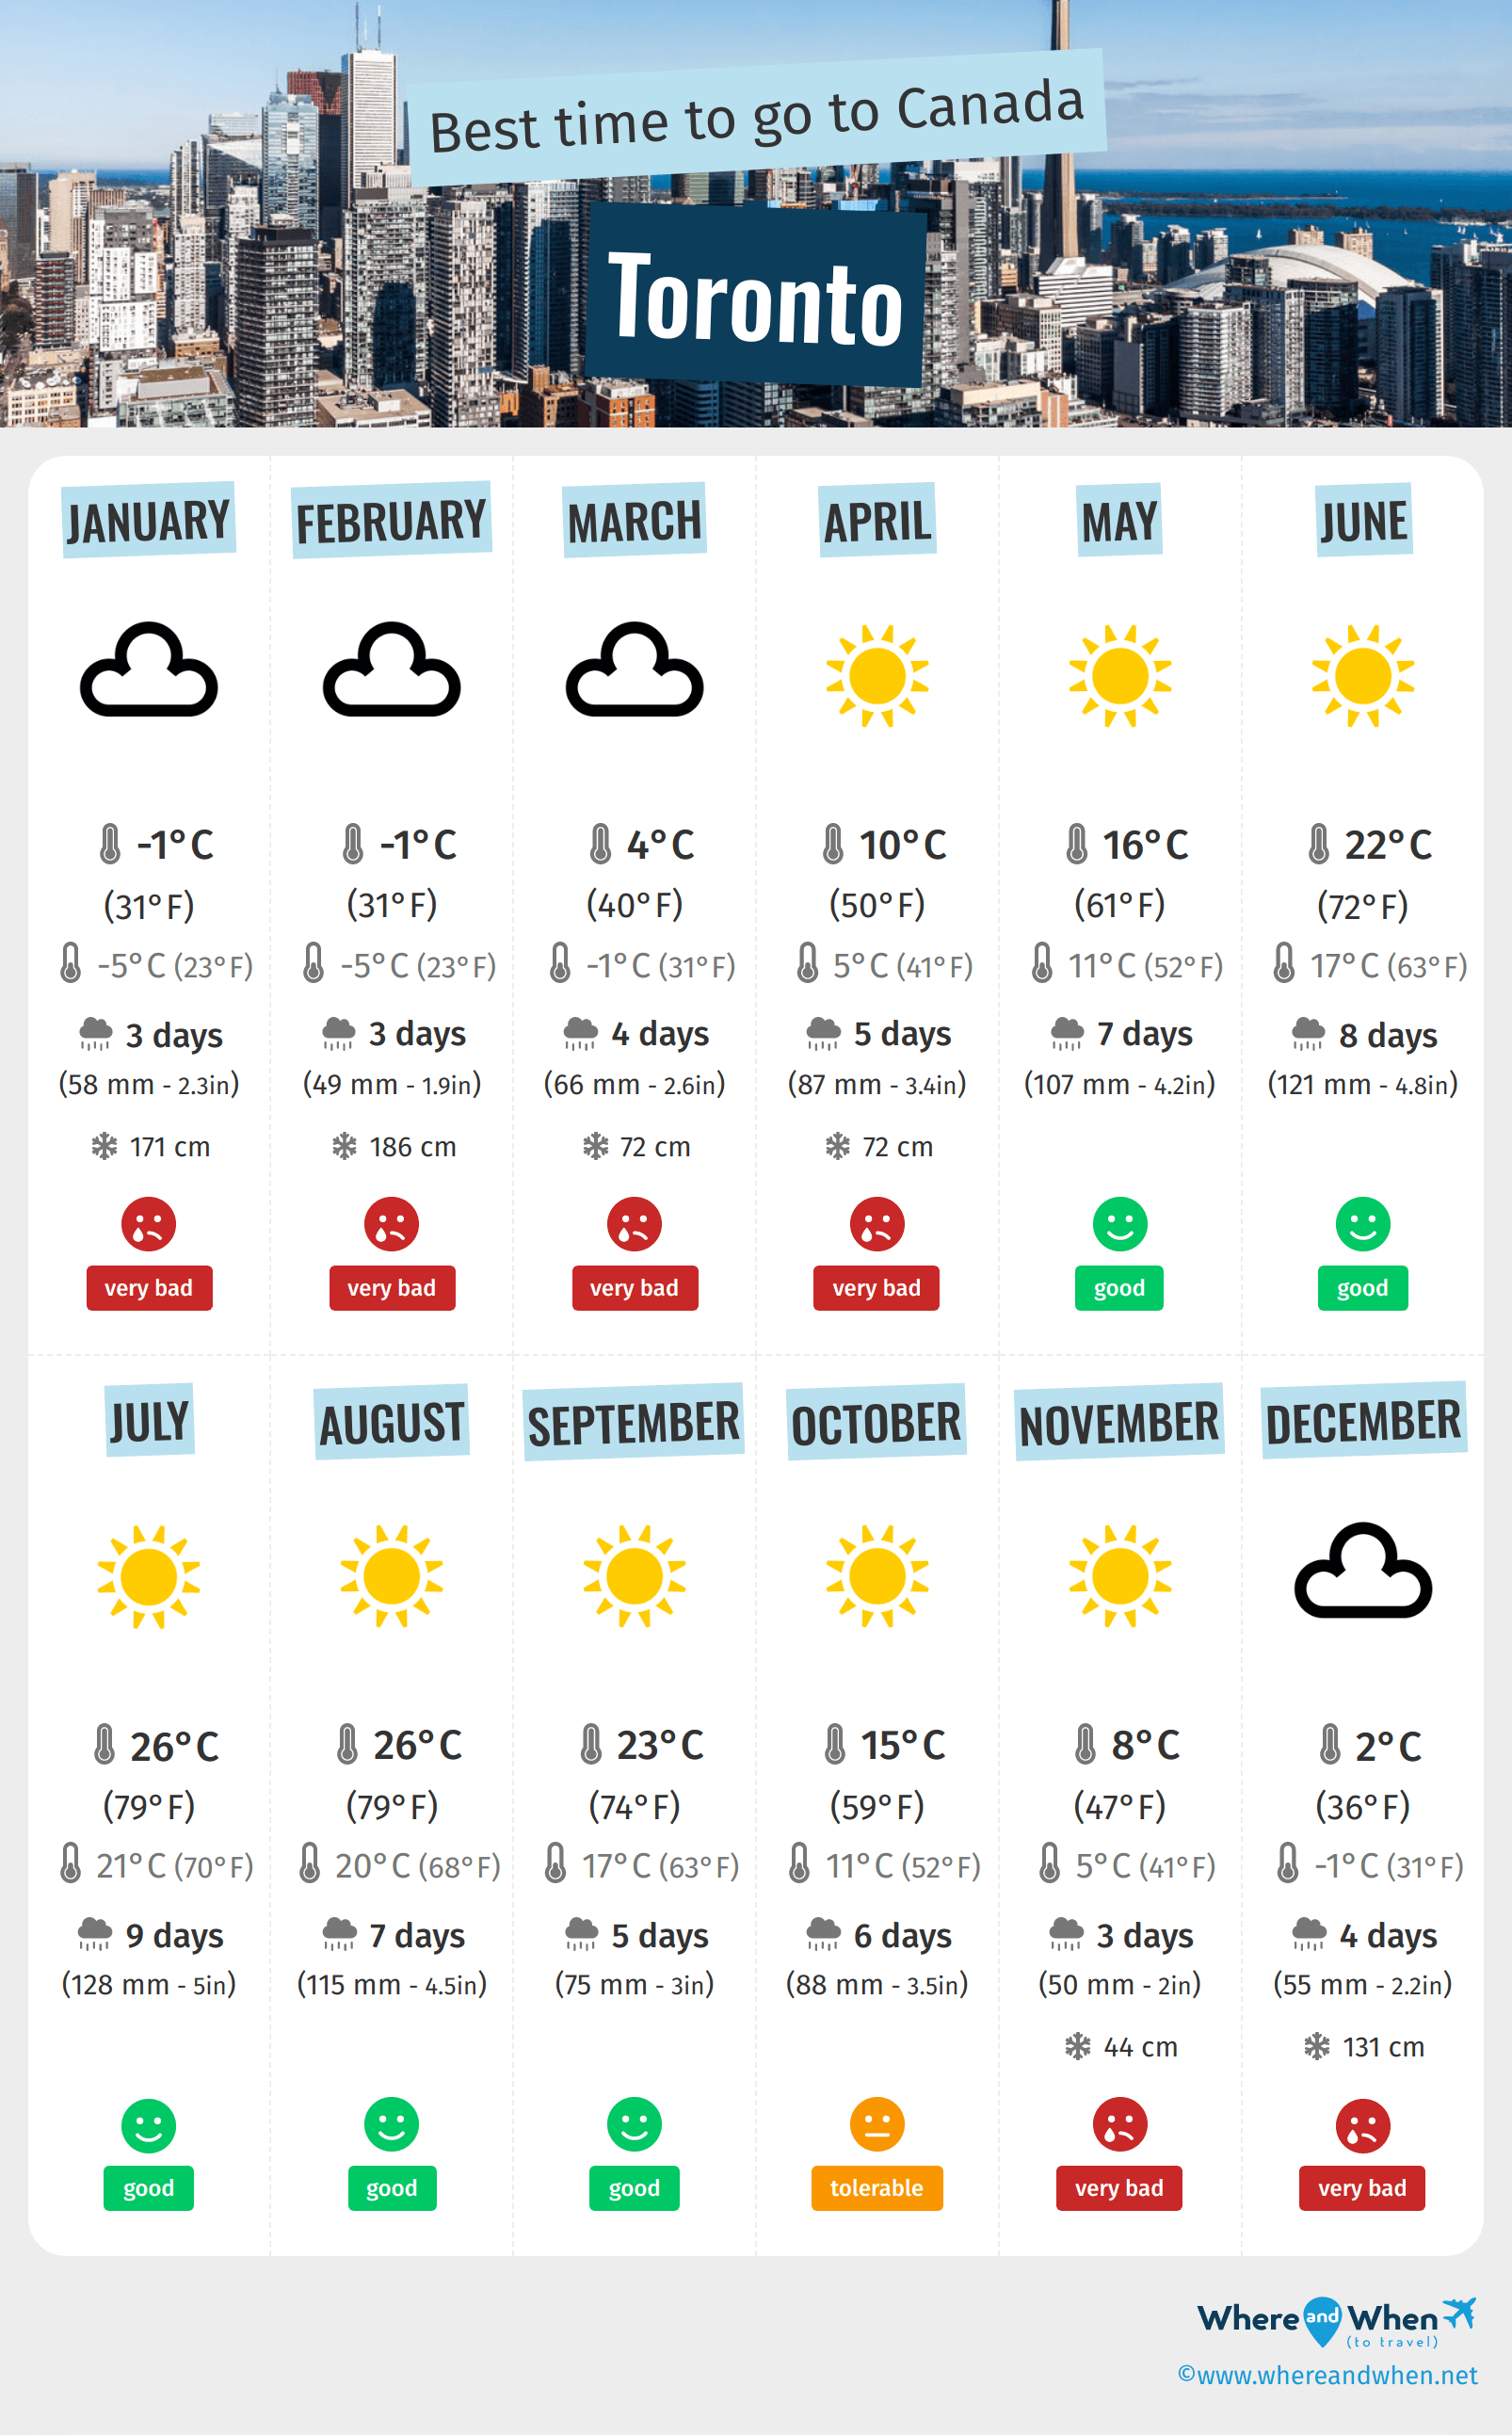 https://www.whereandwhen.net/site/images/infographics/en/best-time-to-visit-toronto-canada-weather-infographic-by-month.png